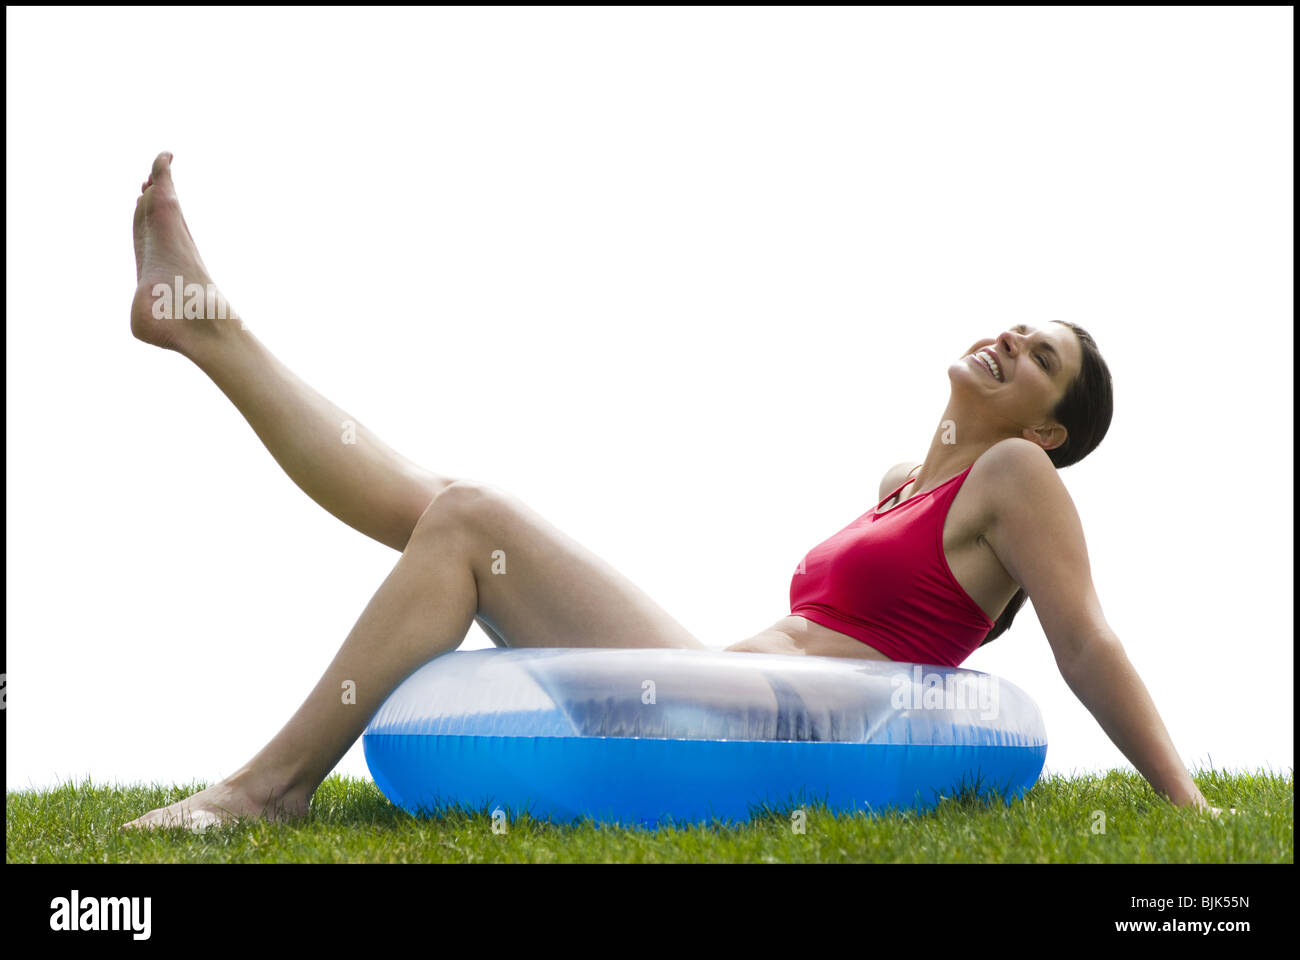 Woman sitting in swimming ring on grass with leg up smiling Stock Photo